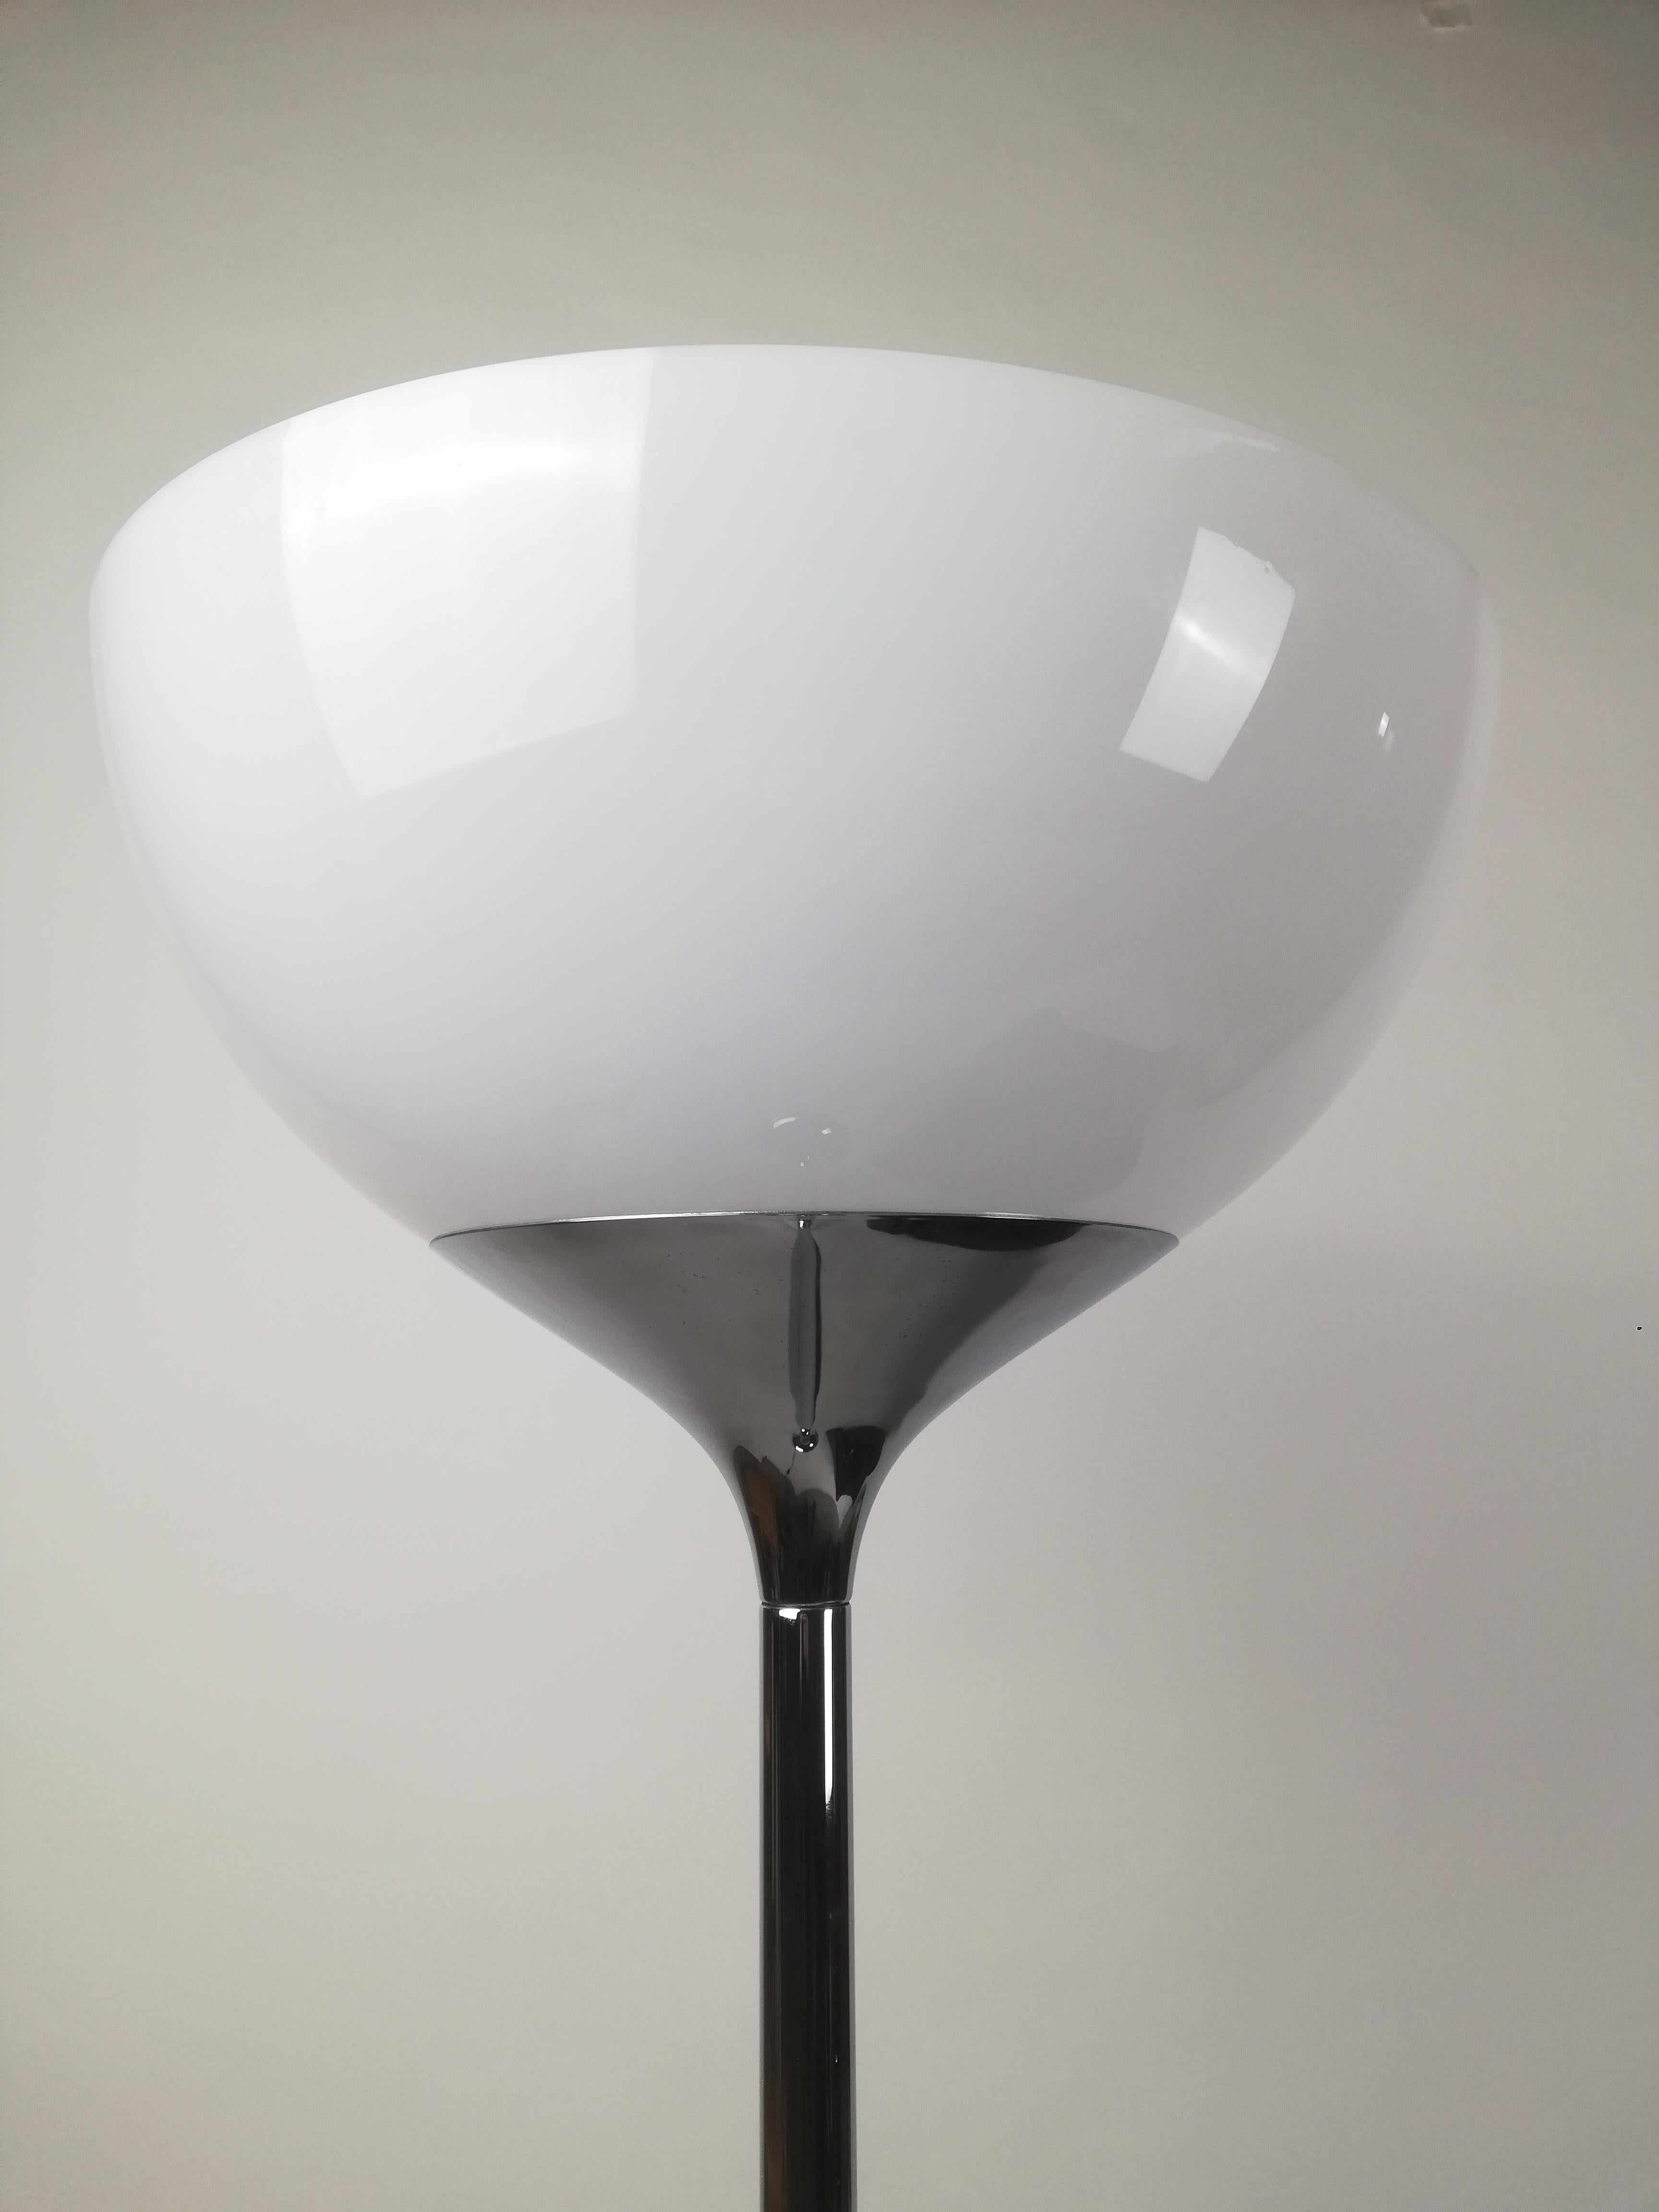 Italian Space Age Floor Lamp by I Guzzini in White Acrylic and Chrome, Italy, 1970s For Sale